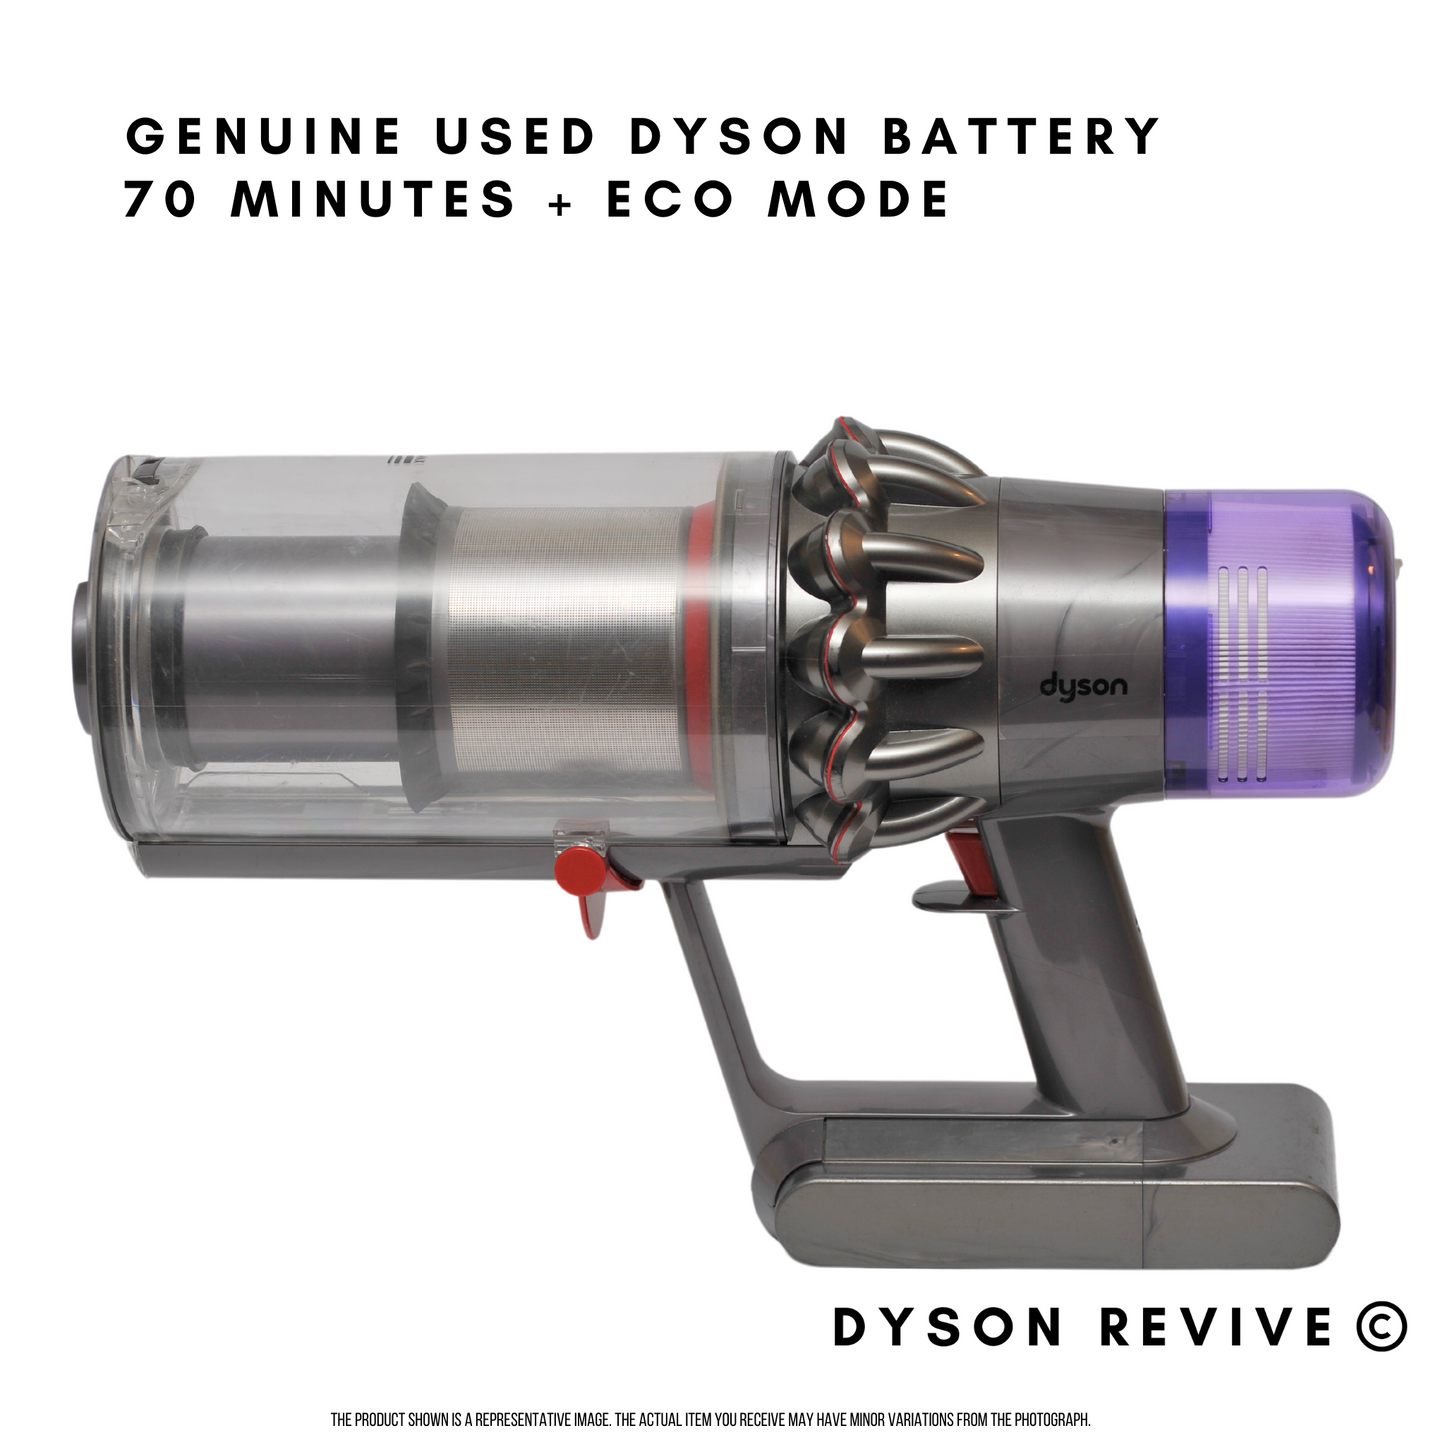 Genuine Dyson Refurbished V11 Main Body With Used Genuine Dyson Battery Vacuum Cleaner - Dyson Revive